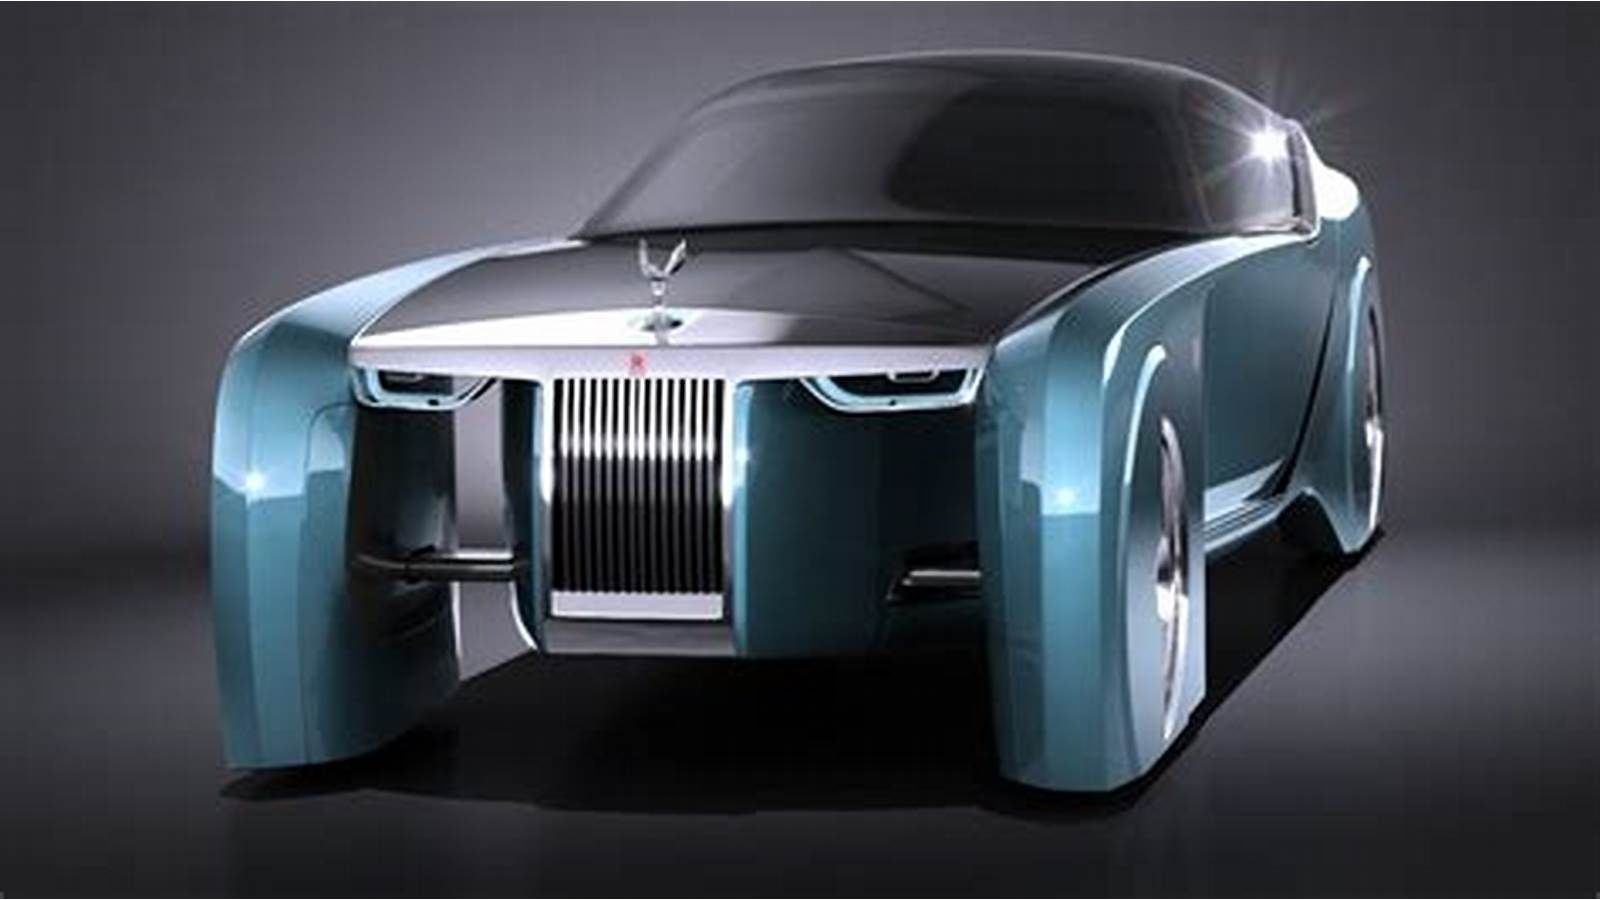 RollsRoyce Vision Next 100 Concept Car Exclusive Inside Look  Fortune